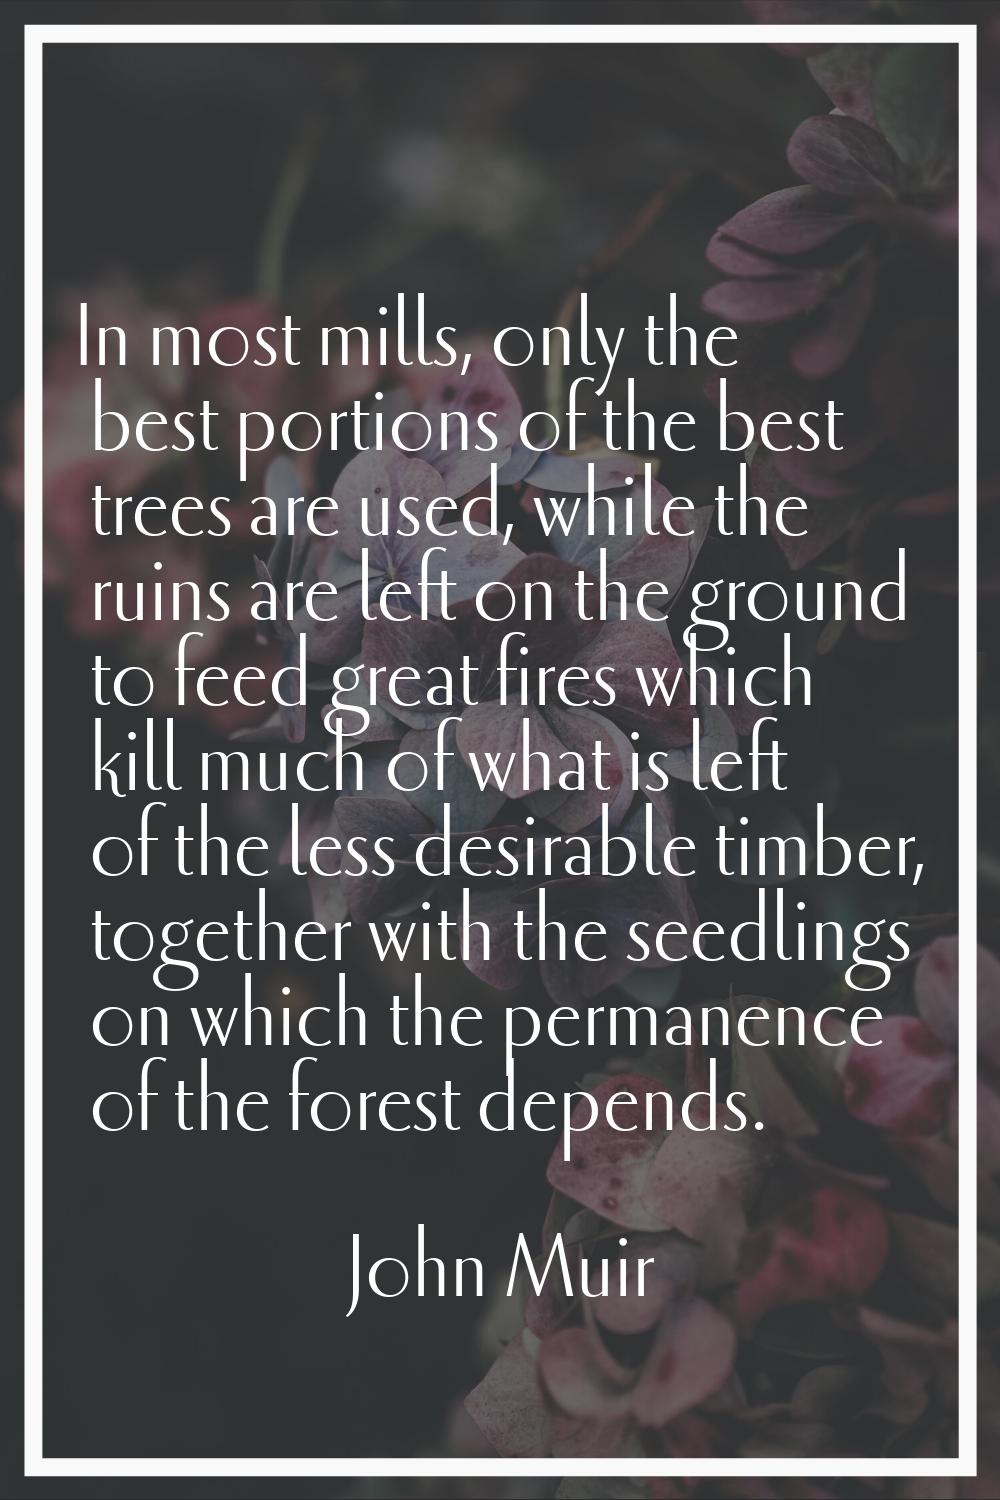 In most mills, only the best portions of the best trees are used, while the ruins are left on the g